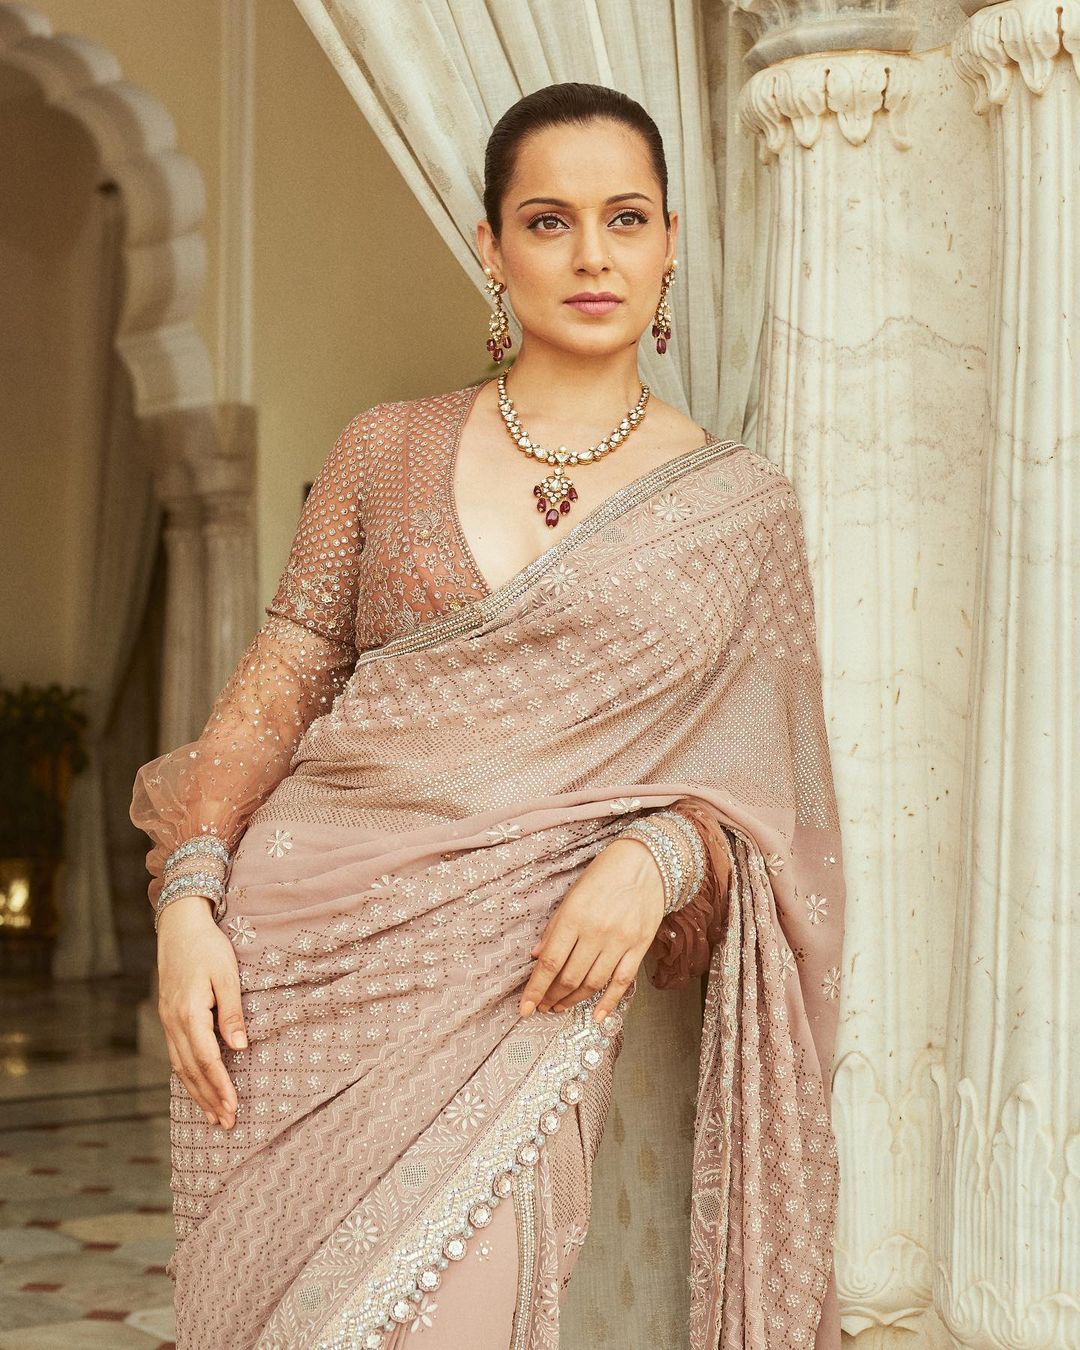 Trust her to make an undeniably royal statement, and she will deliver. Take a look at her in this ivory Chikankari saree, an embroidered blouse and a stunning necklace. (Image: Instagram)